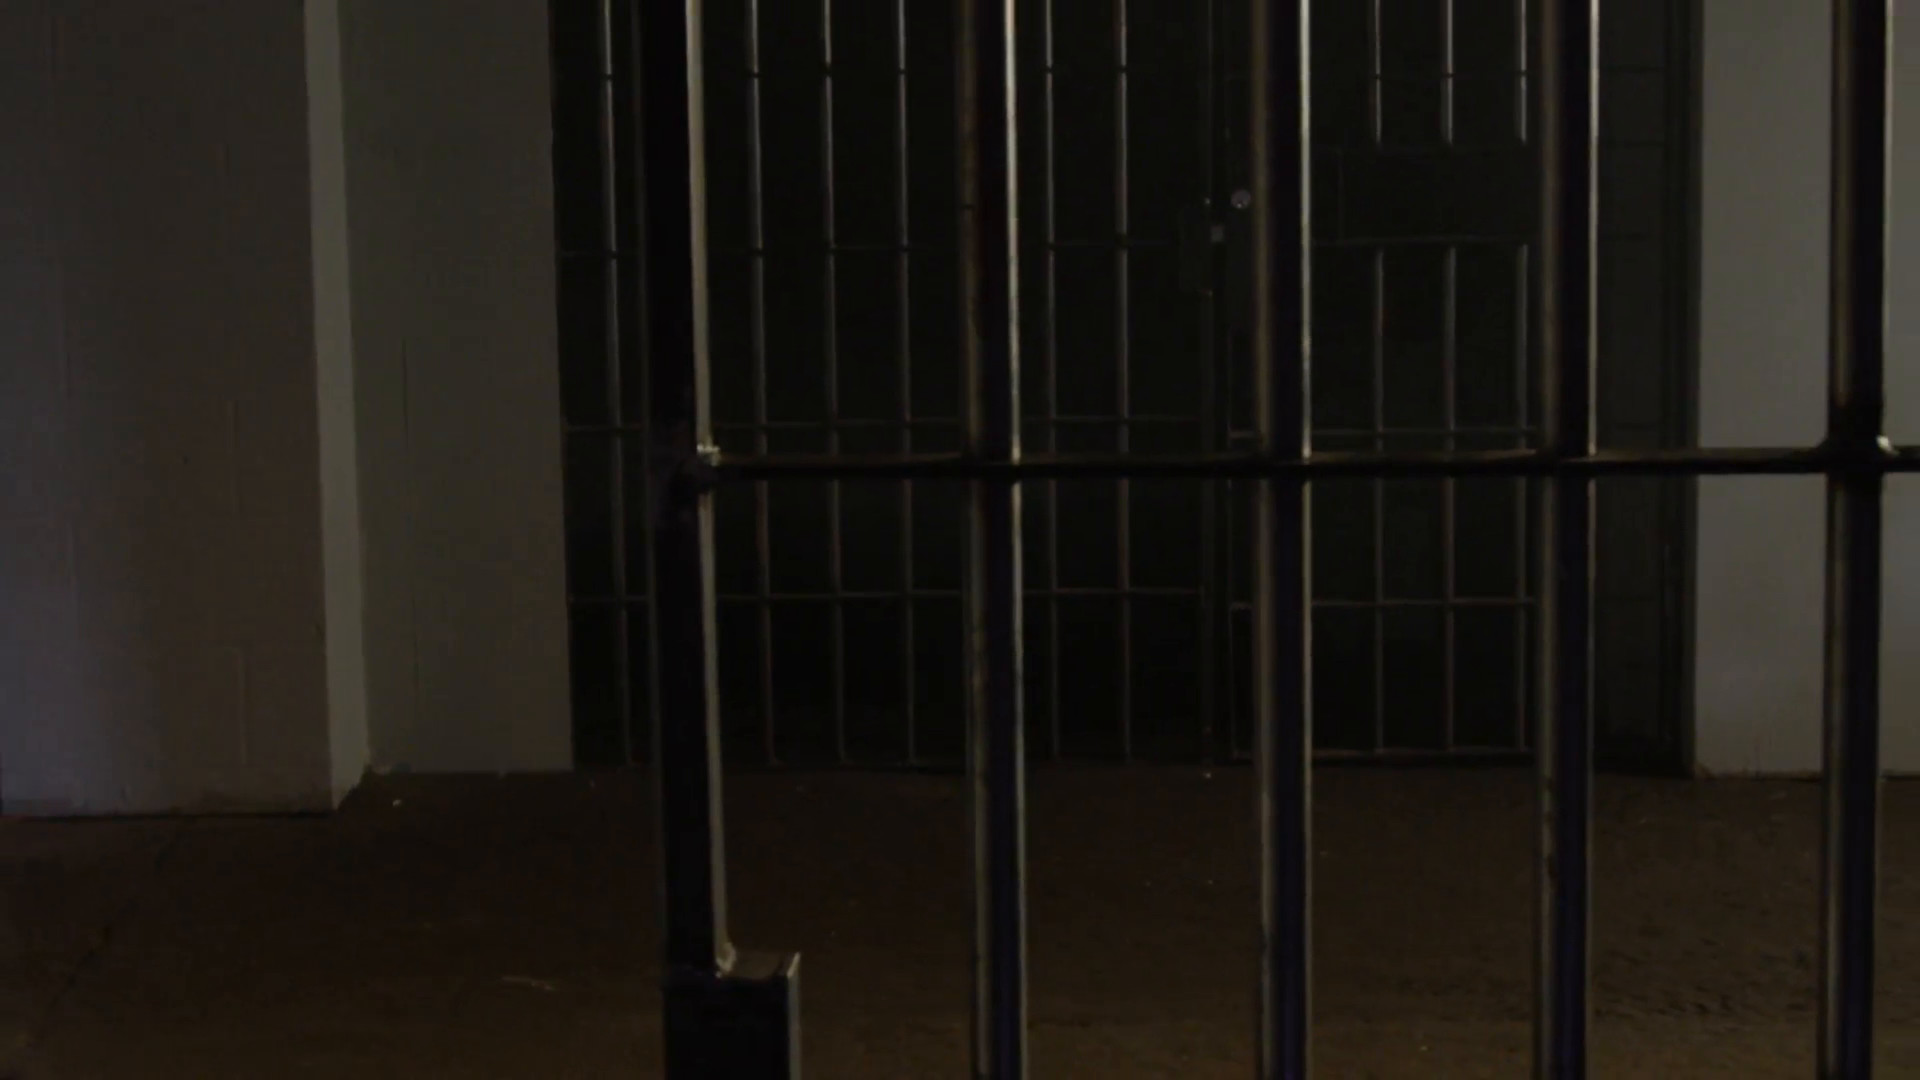 1920x1080 Zoom out to reveal prison cell from inside Stock Video Footage - VideoBlocks